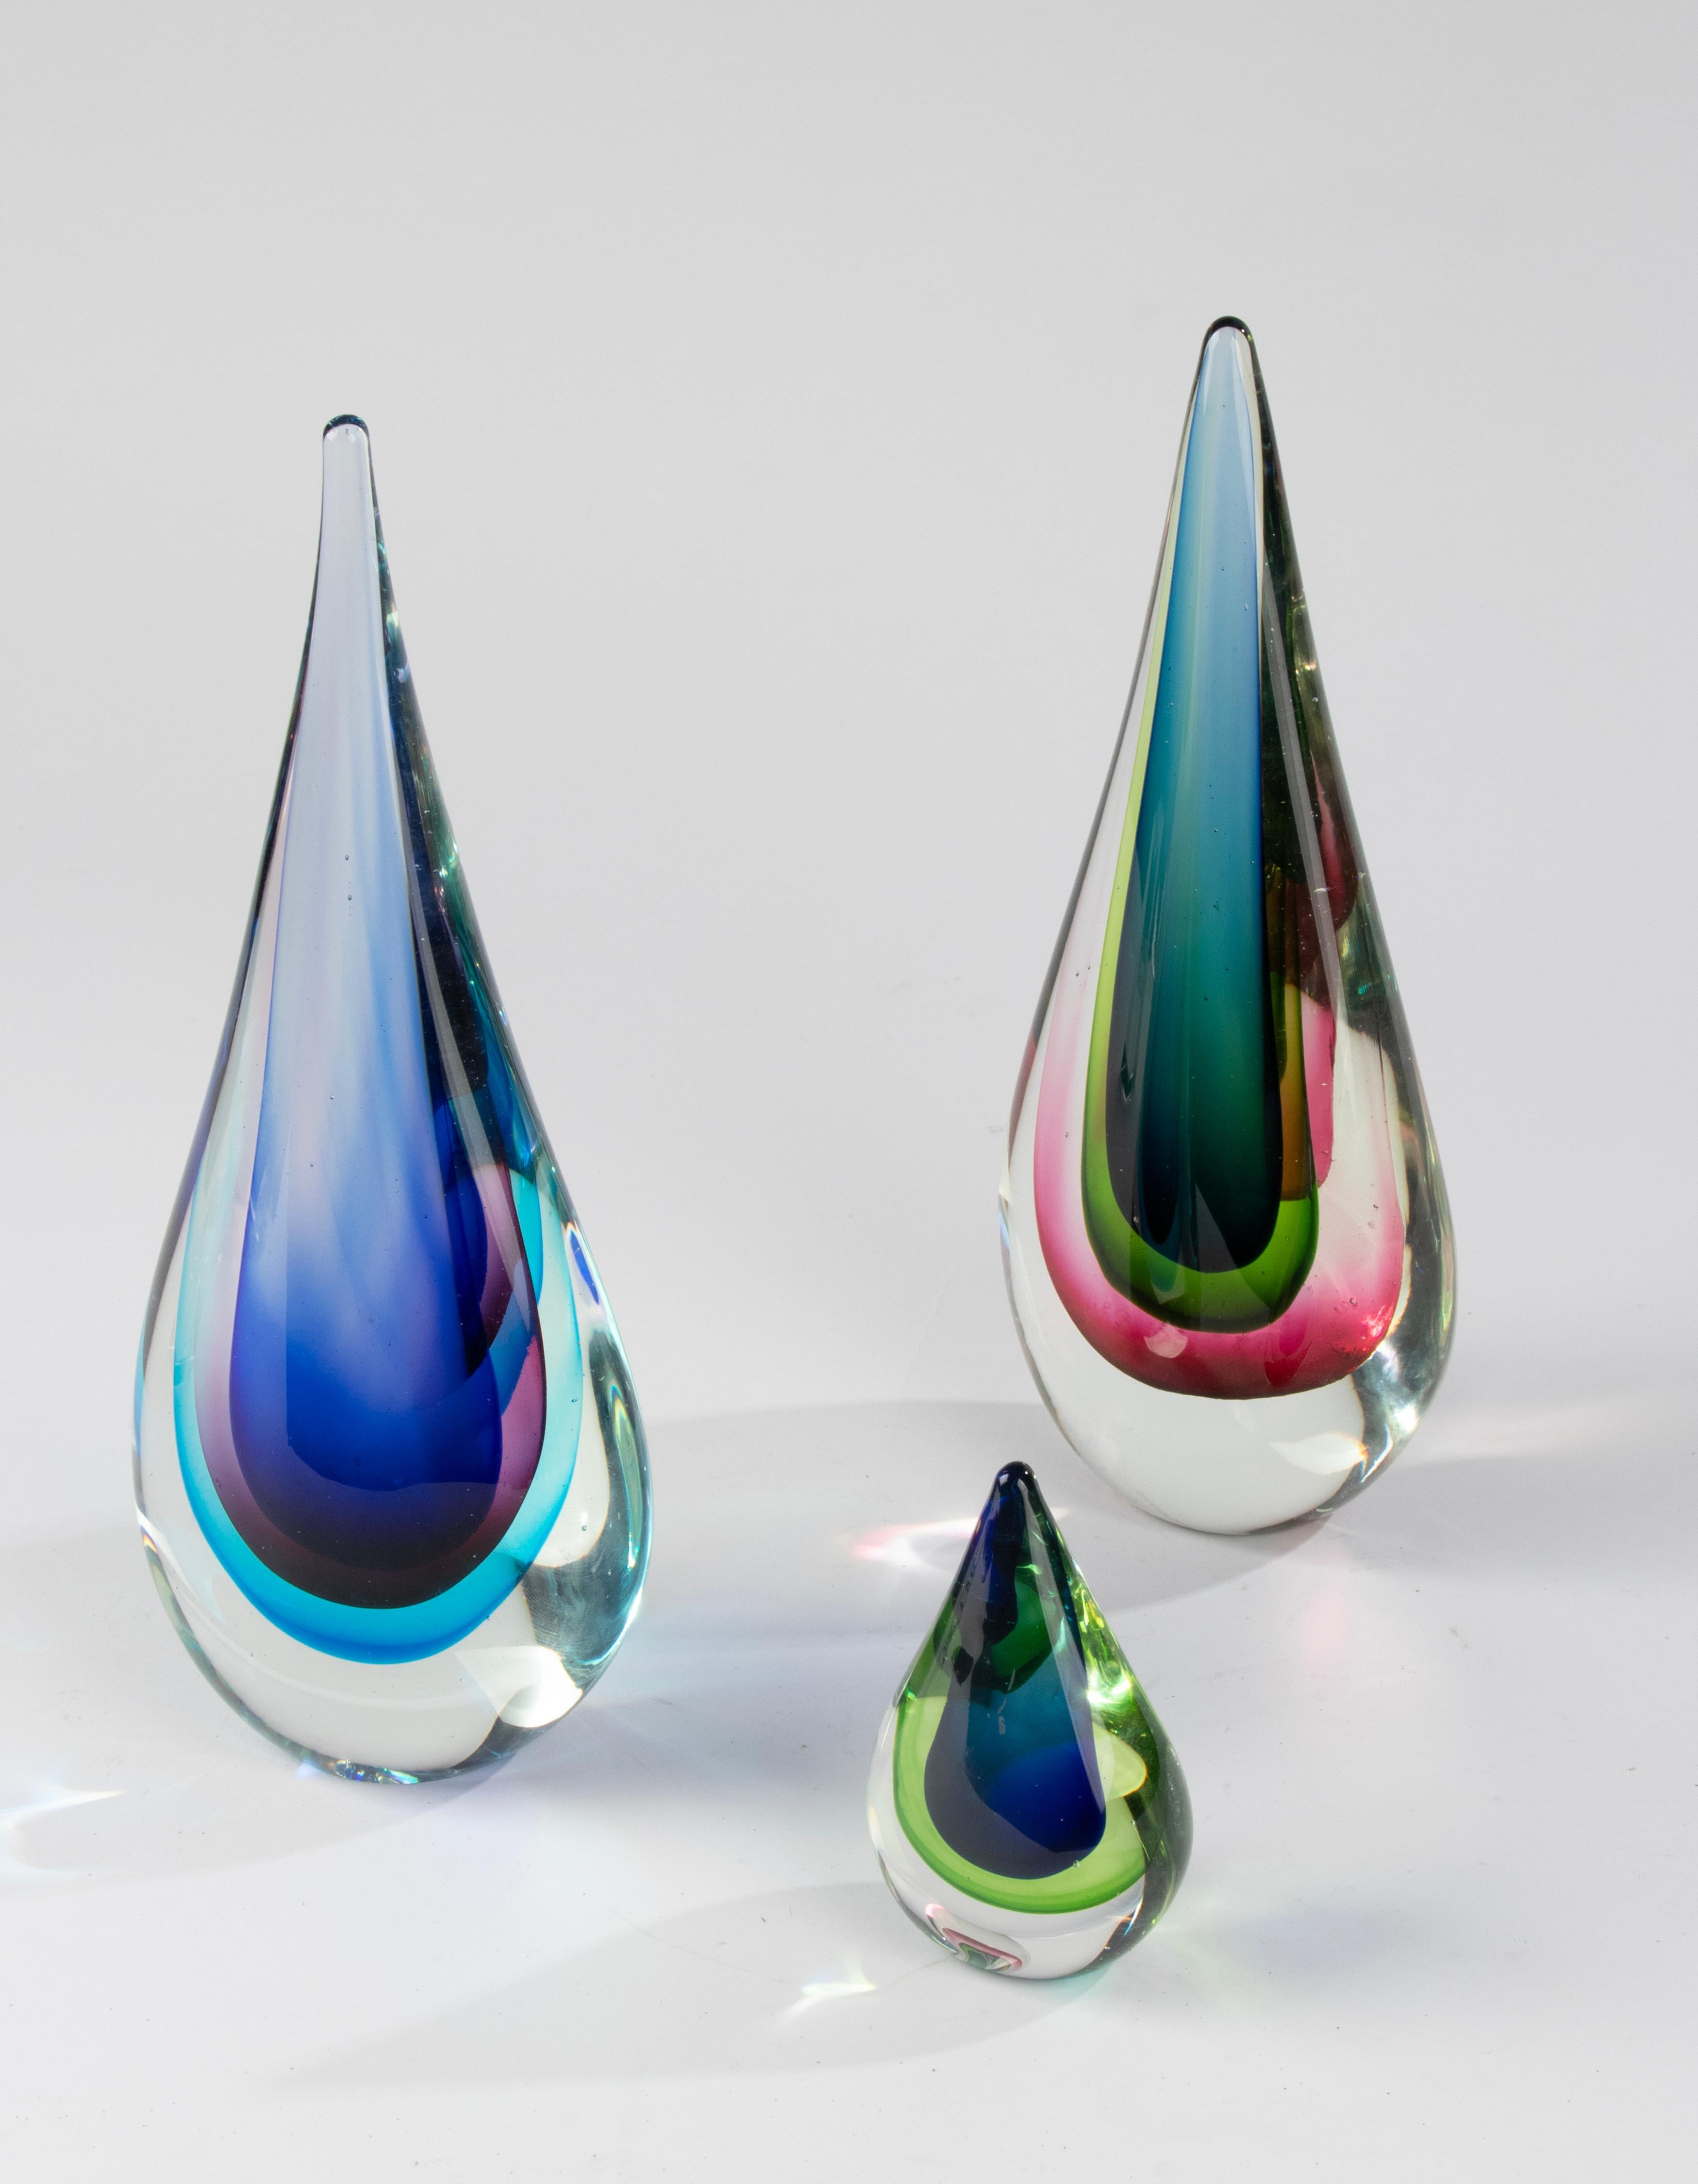 Mid-20th Century Set of 3 Murano Sommerso Teardrop Art Glass Sculptures - Flavio Poli  For Sale